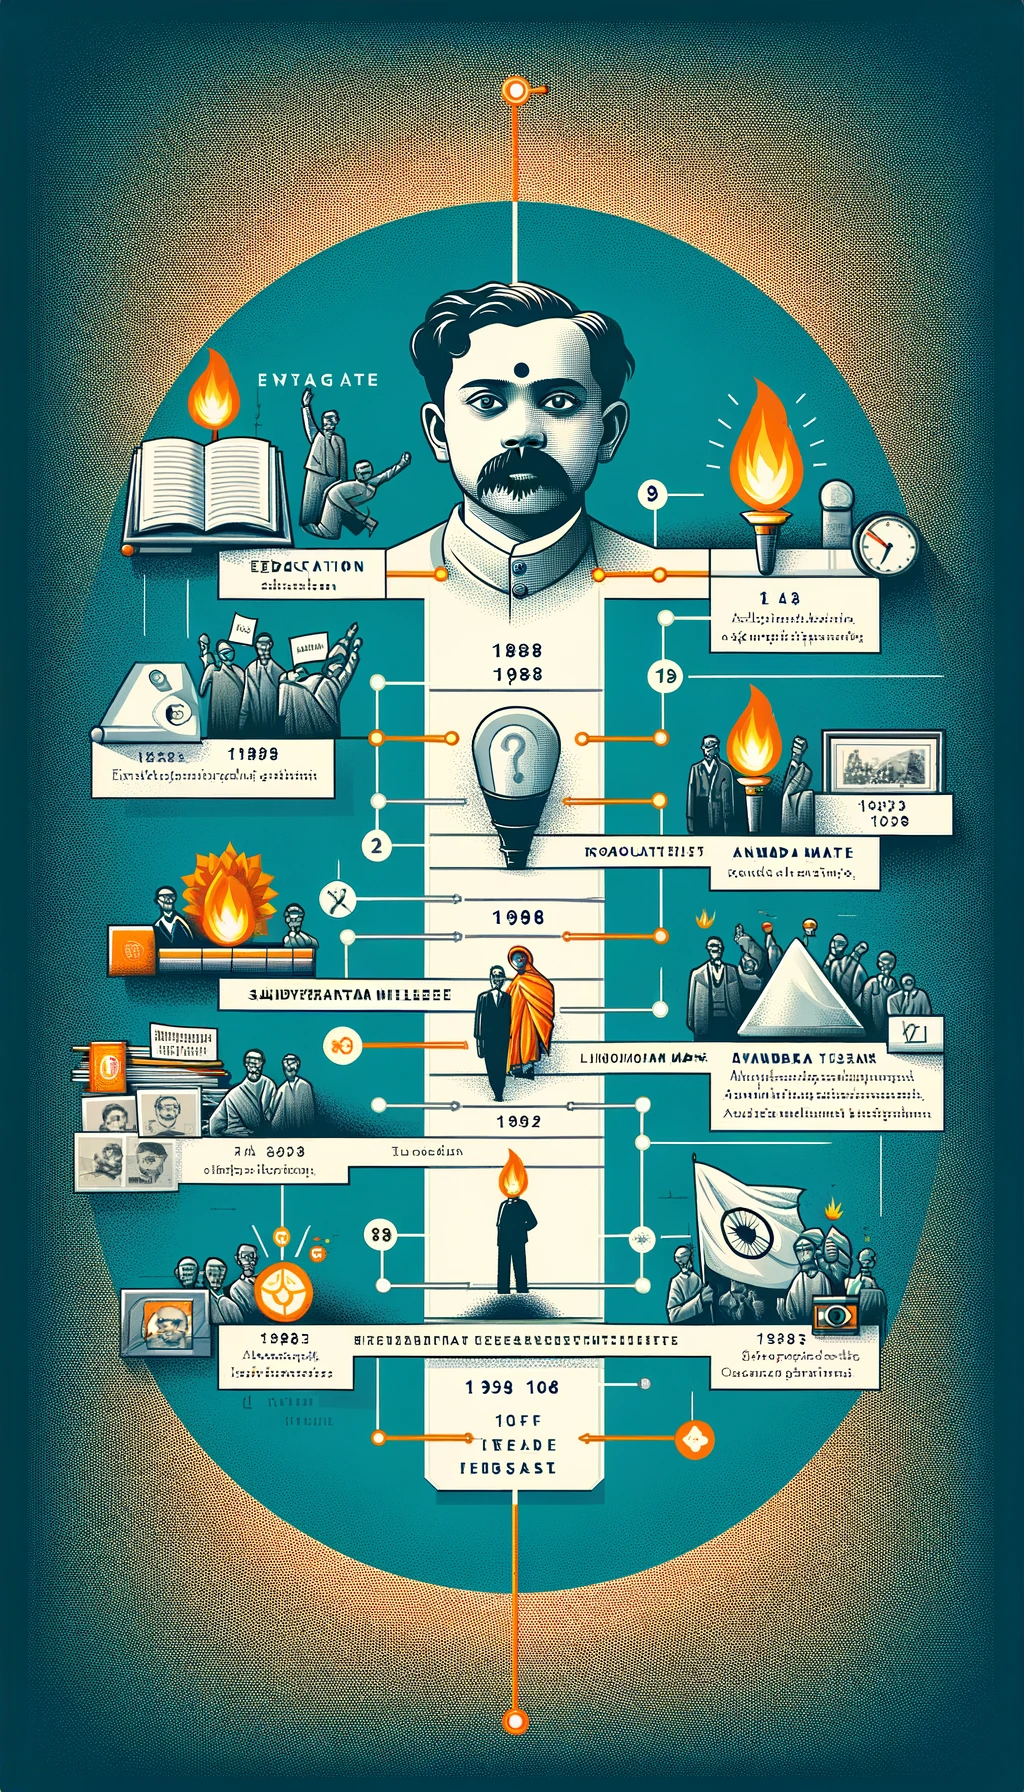 infographic, timeline, Satyendranath Bose, portrait, education icon, loudspeaker icon, torch icon, Swadeshi Movement, Ananda Math, protests, flame icon, legacy, revolutionary activities, historical events